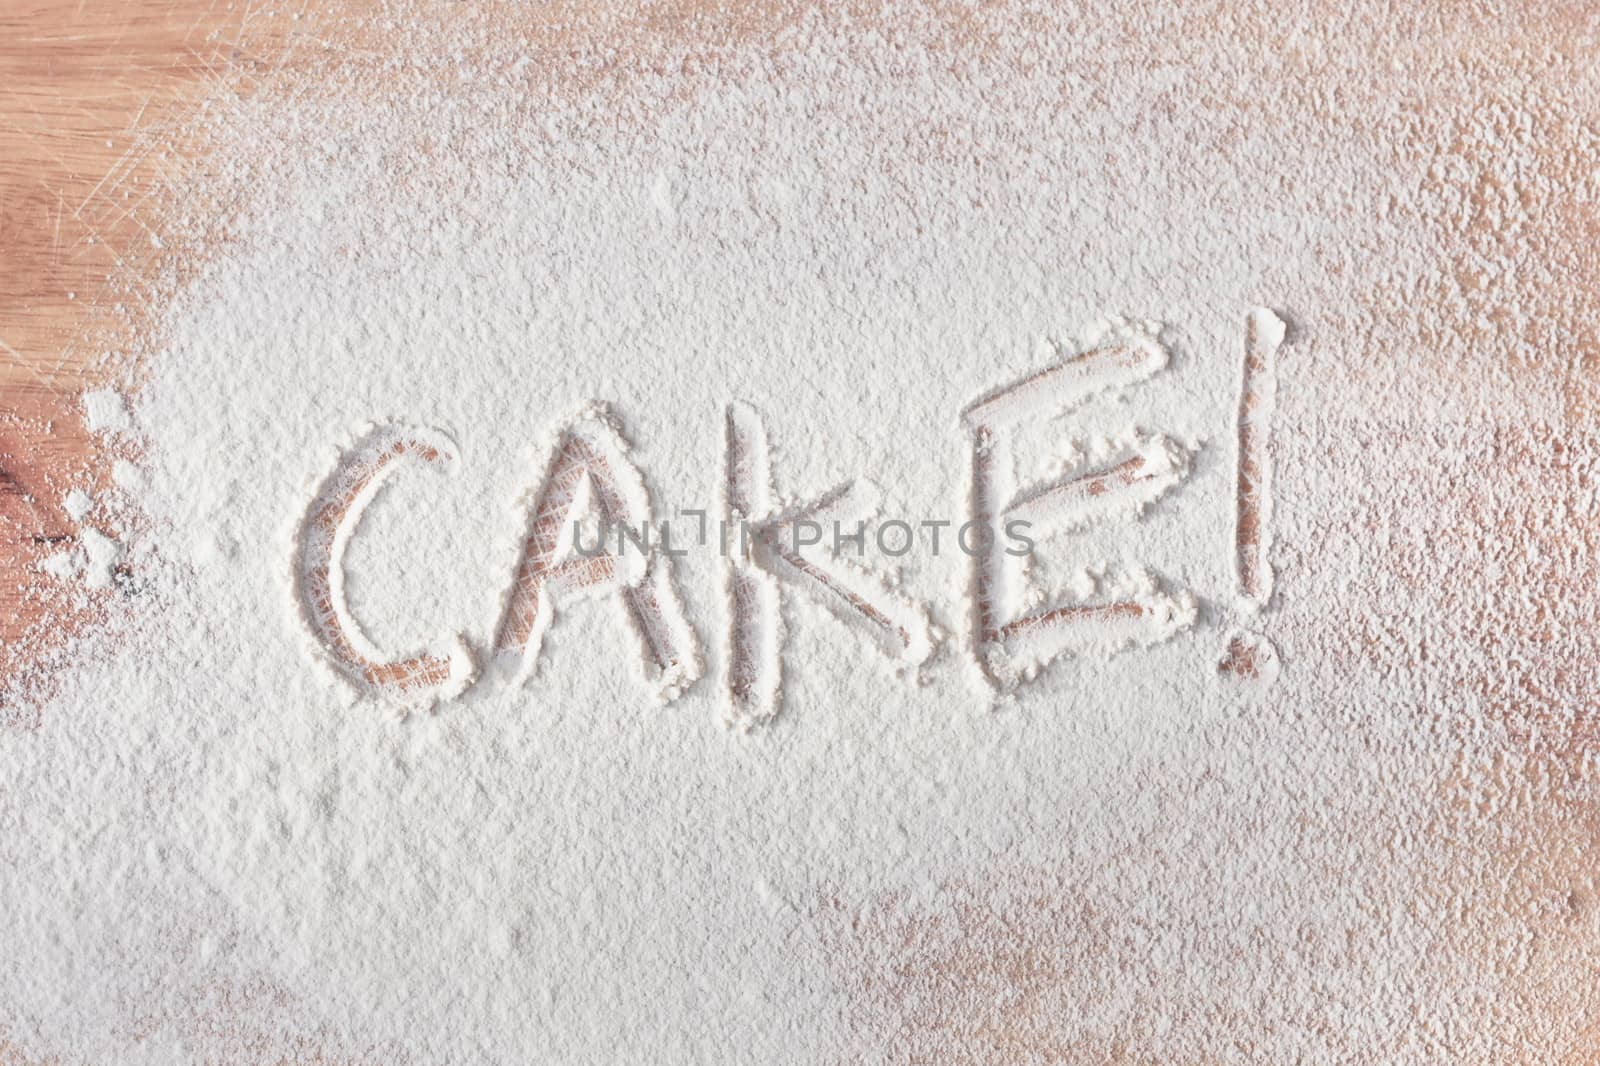 Cake written in flour on a wooden surface